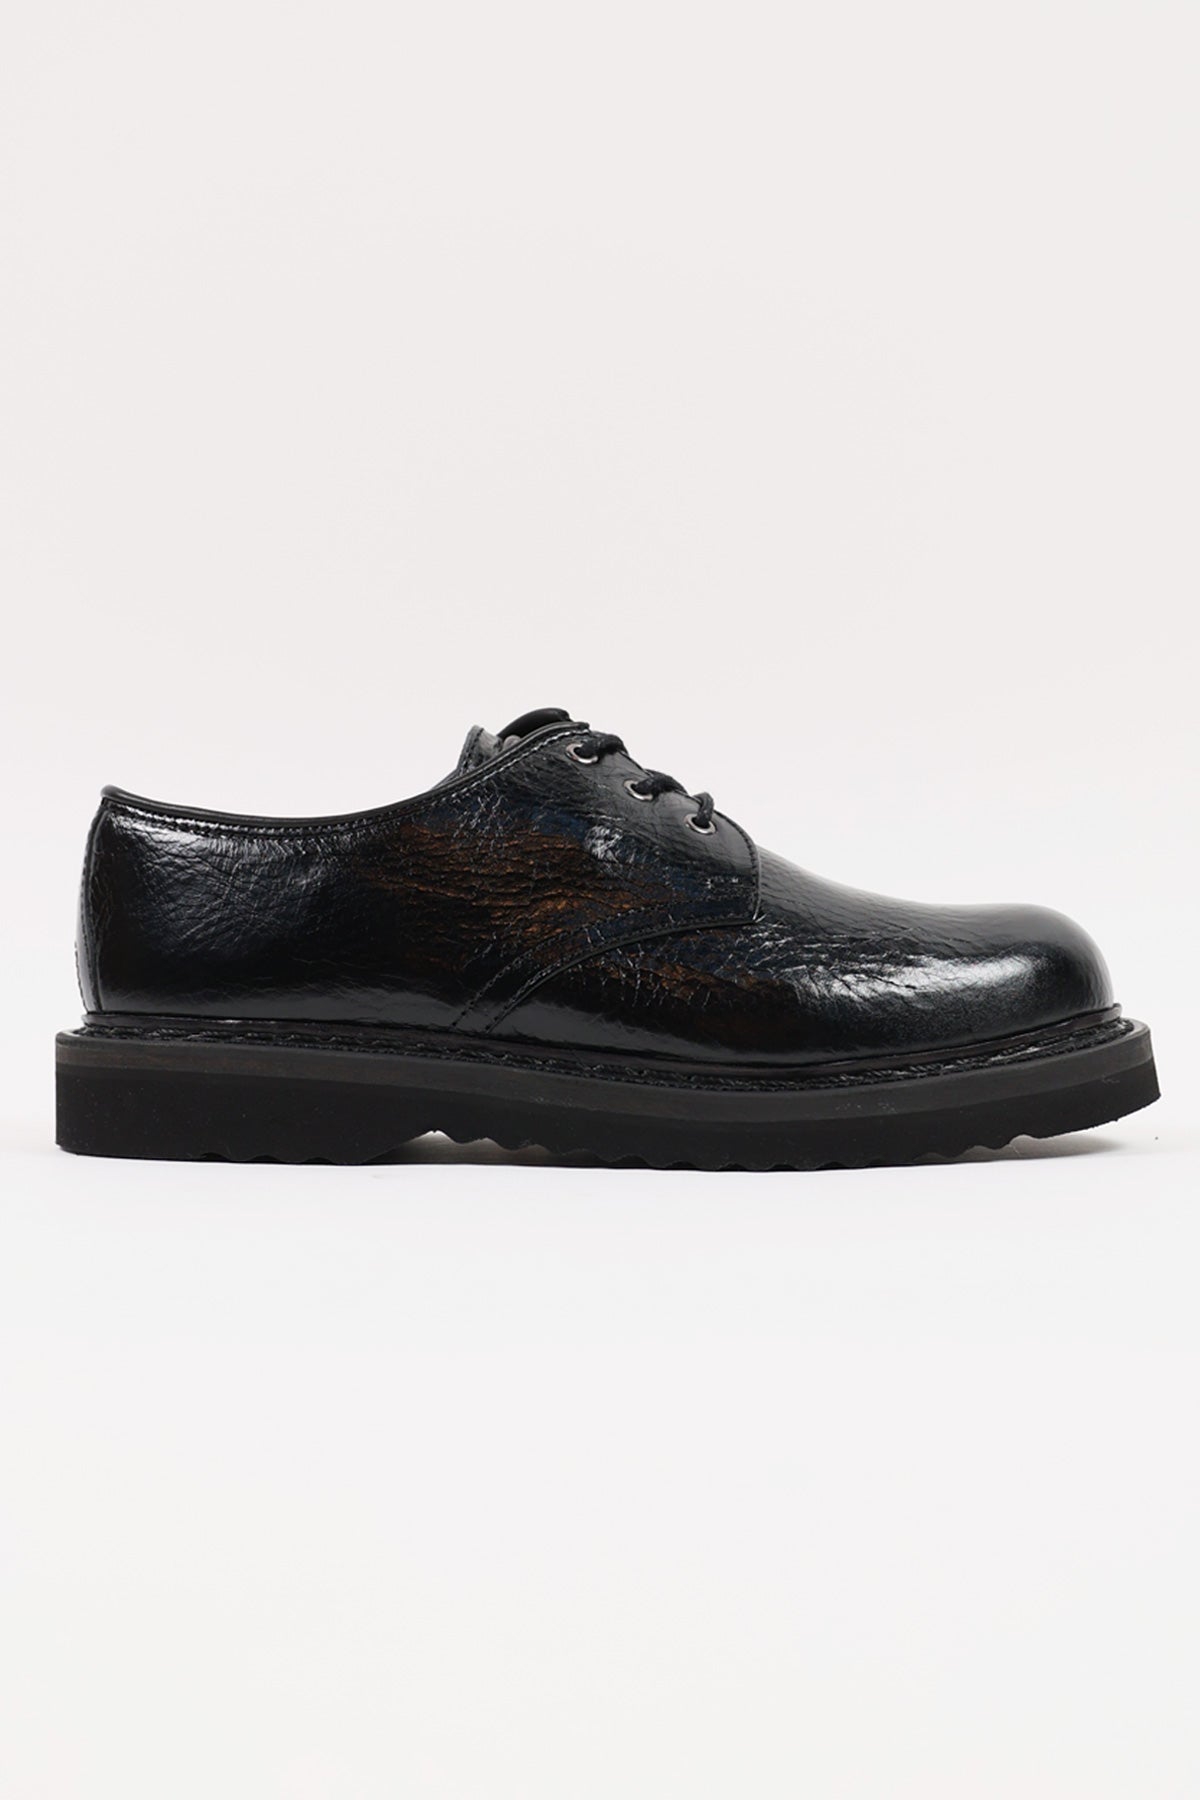 Trampler Shoe - Black Cracked Patent Leather